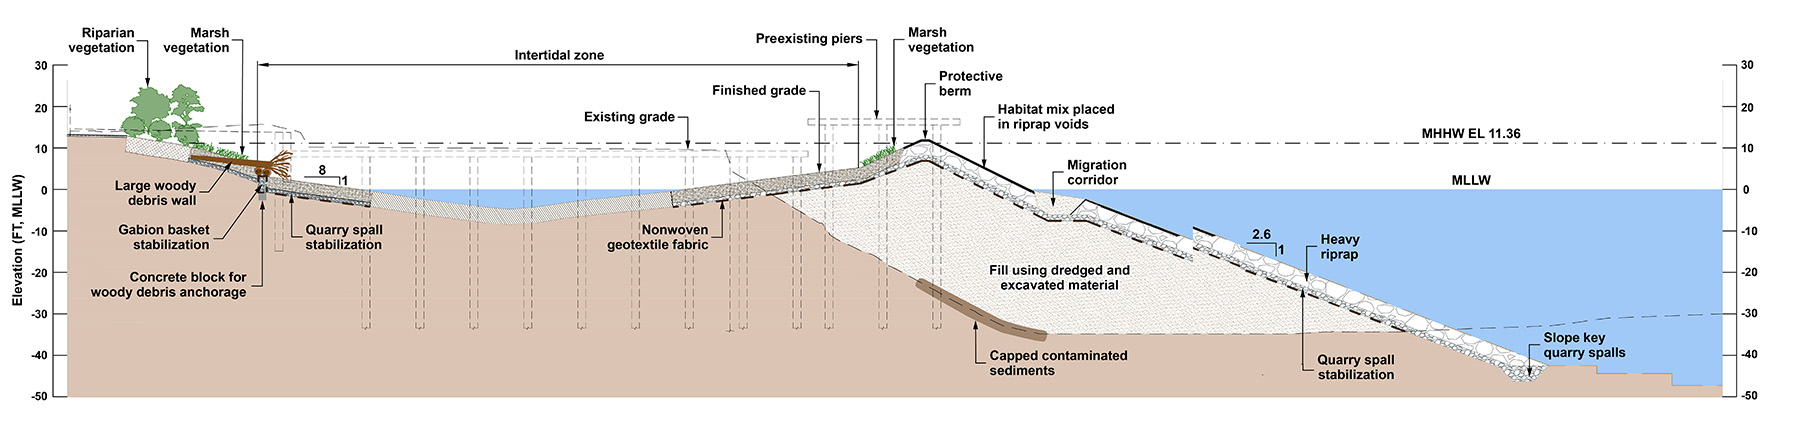 Cross section shows the various parts of an aquatic habitat including intertidal mudflats, marsh and riparian vegetation, quarry spall stabilization, the migration corridor, and other features of the site. 